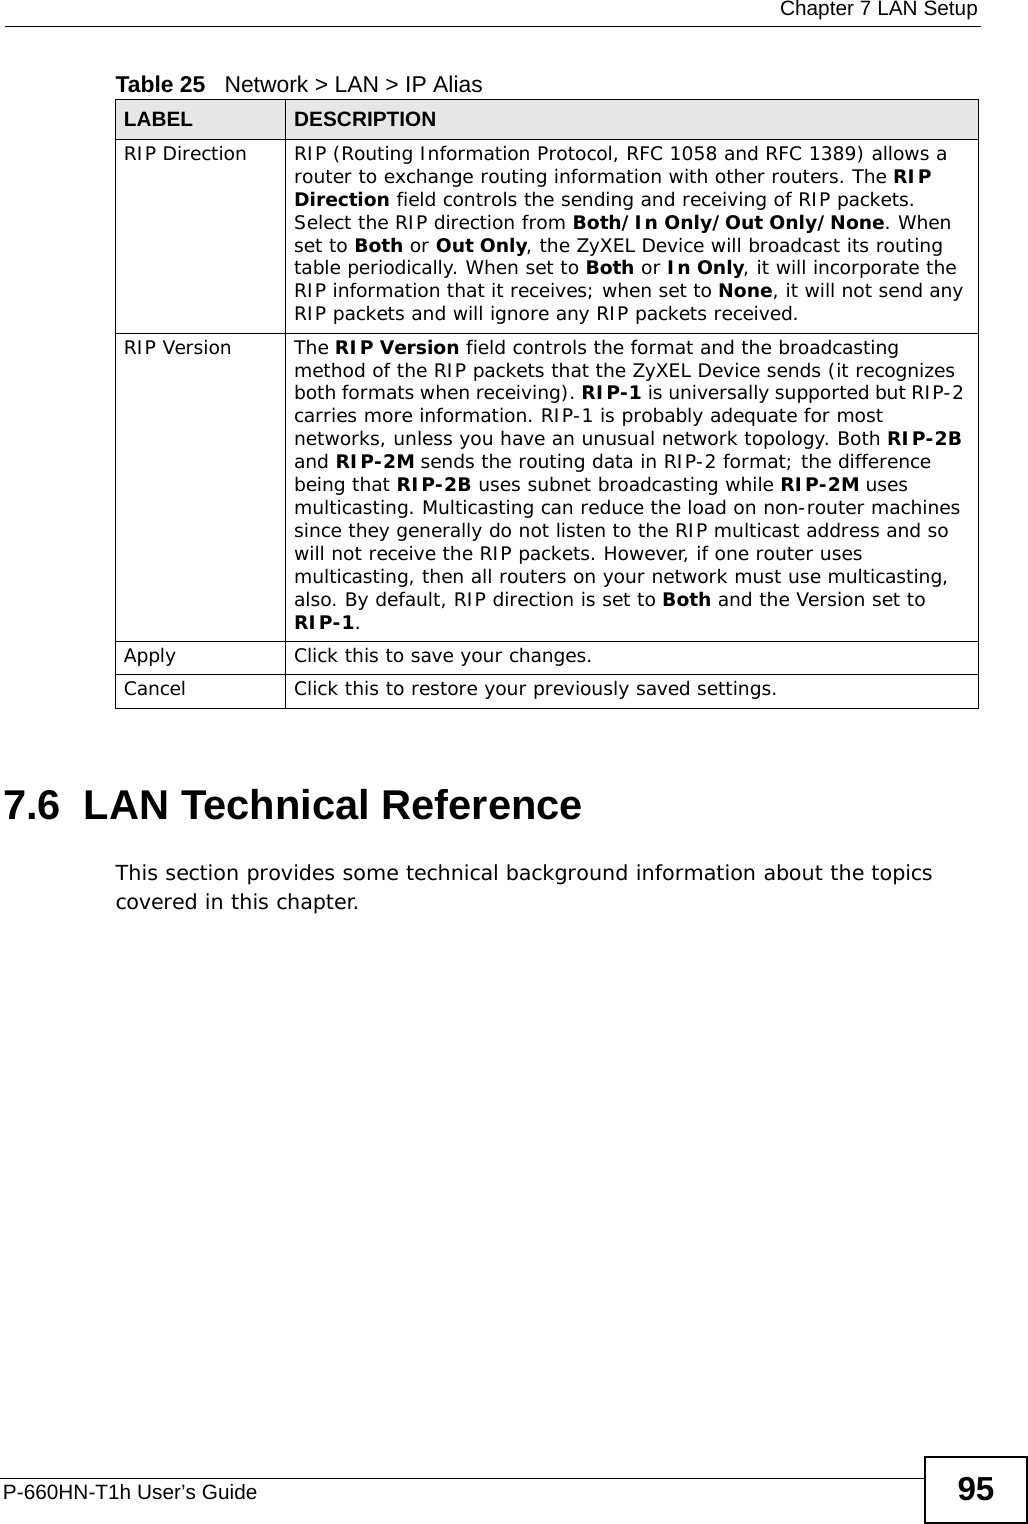  Chapter 7 LAN SetupP-660HN-T1h User’s Guide 957.6  LAN Technical ReferenceThis section provides some technical background information about the topics covered in this chapter.RIP Direction RIP (Routing Information Protocol, RFC 1058 and RFC 1389) allows a router to exchange routing information with other routers. The RIP Direction field controls the sending and receiving of RIP packets. Select the RIP direction from Both/In Only/Out Only/None. When set to Both or Out Only, the ZyXEL Device will broadcast its routing table periodically. When set to Both or In Only, it will incorporate the RIP information that it receives; when set to None, it will not send any RIP packets and will ignore any RIP packets received.RIP Version The RIP Version field controls the format and the broadcasting method of the RIP packets that the ZyXEL Device sends (it recognizes both formats when receiving). RIP-1 is universally supported but RIP-2 carries more information. RIP-1 is probably adequate for most networks, unless you have an unusual network topology. Both RIP-2B and RIP-2M sends the routing data in RIP-2 format; the difference being that RIP-2B uses subnet broadcasting while RIP-2M uses multicasting. Multicasting can reduce the load on non-router machines since they generally do not listen to the RIP multicast address and so will not receive the RIP packets. However, if one router uses multicasting, then all routers on your network must use multicasting, also. By default, RIP direction is set to Both and the Version set to RIP-1.Apply Click this to save your changes.Cancel Click this to restore your previously saved settings.Table 25   Network &gt; LAN &gt; IP Alias LABEL DESCRIPTION